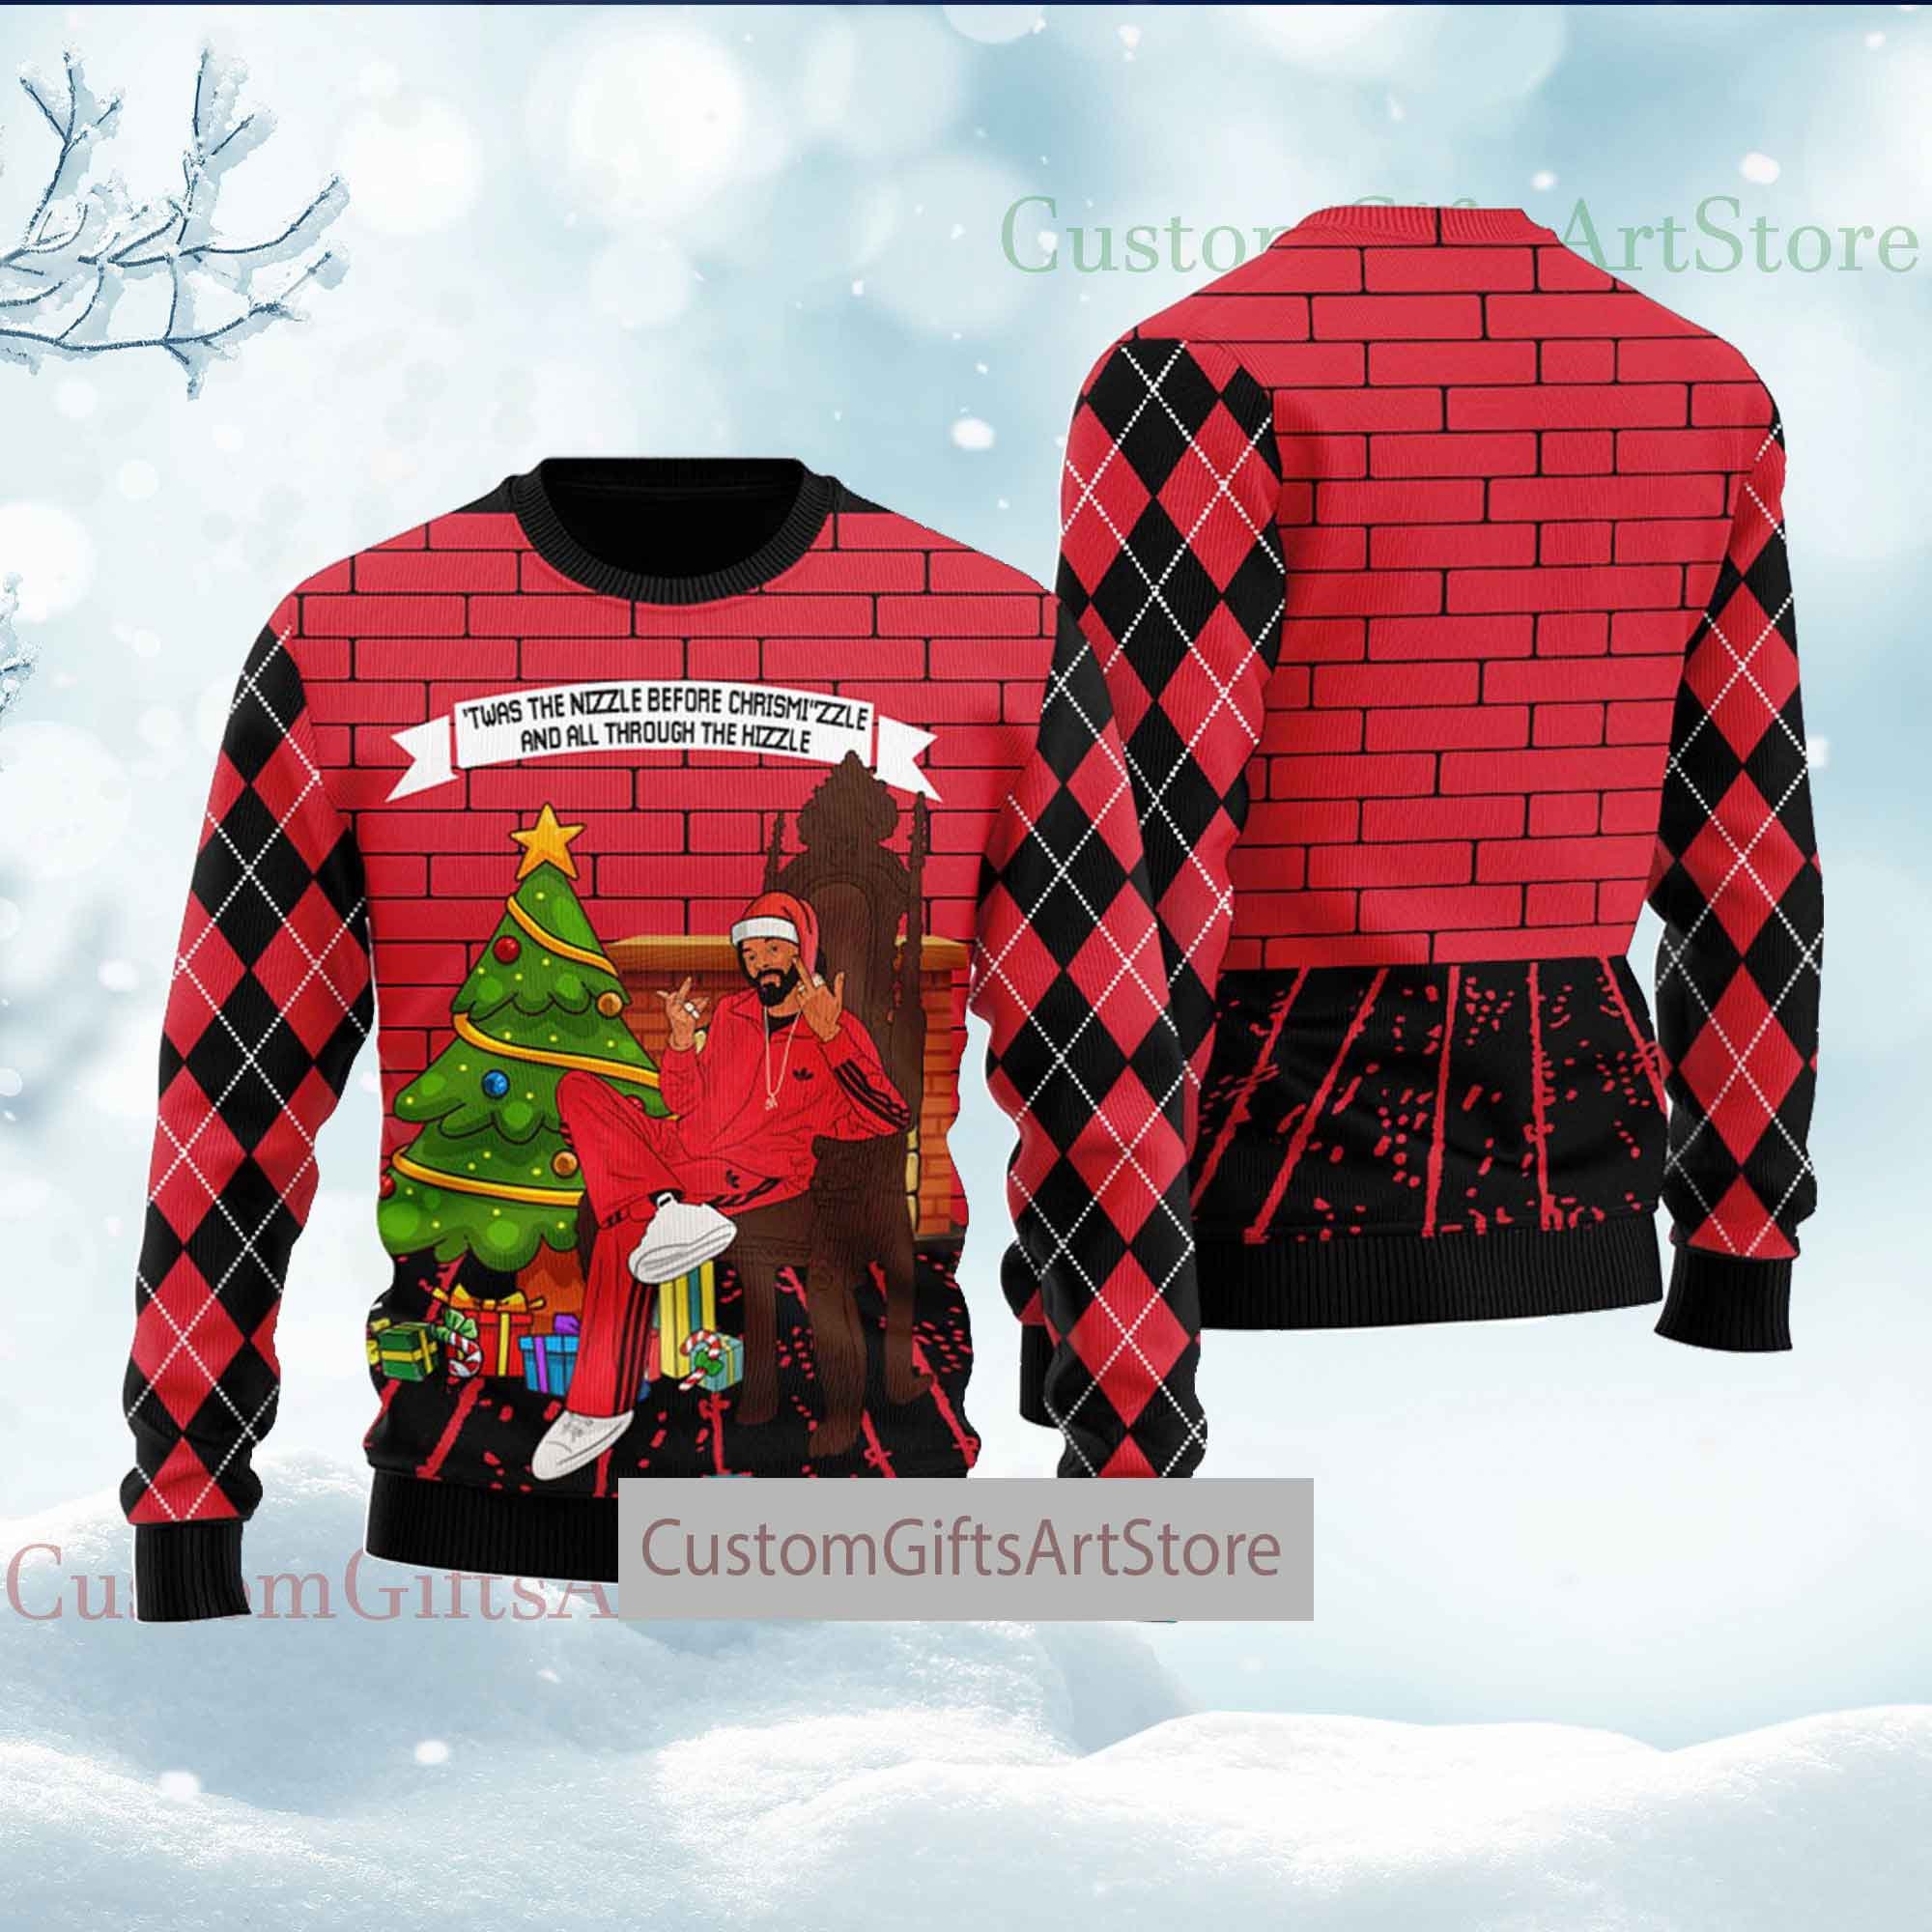 Discover Snoop Dogg Presents Christmas Ugly Sweater, Funny Cute Ugly Christmas Sweater, Xmas Sweatshirt, Holiday Spirit, Sweater for Holiday Parties